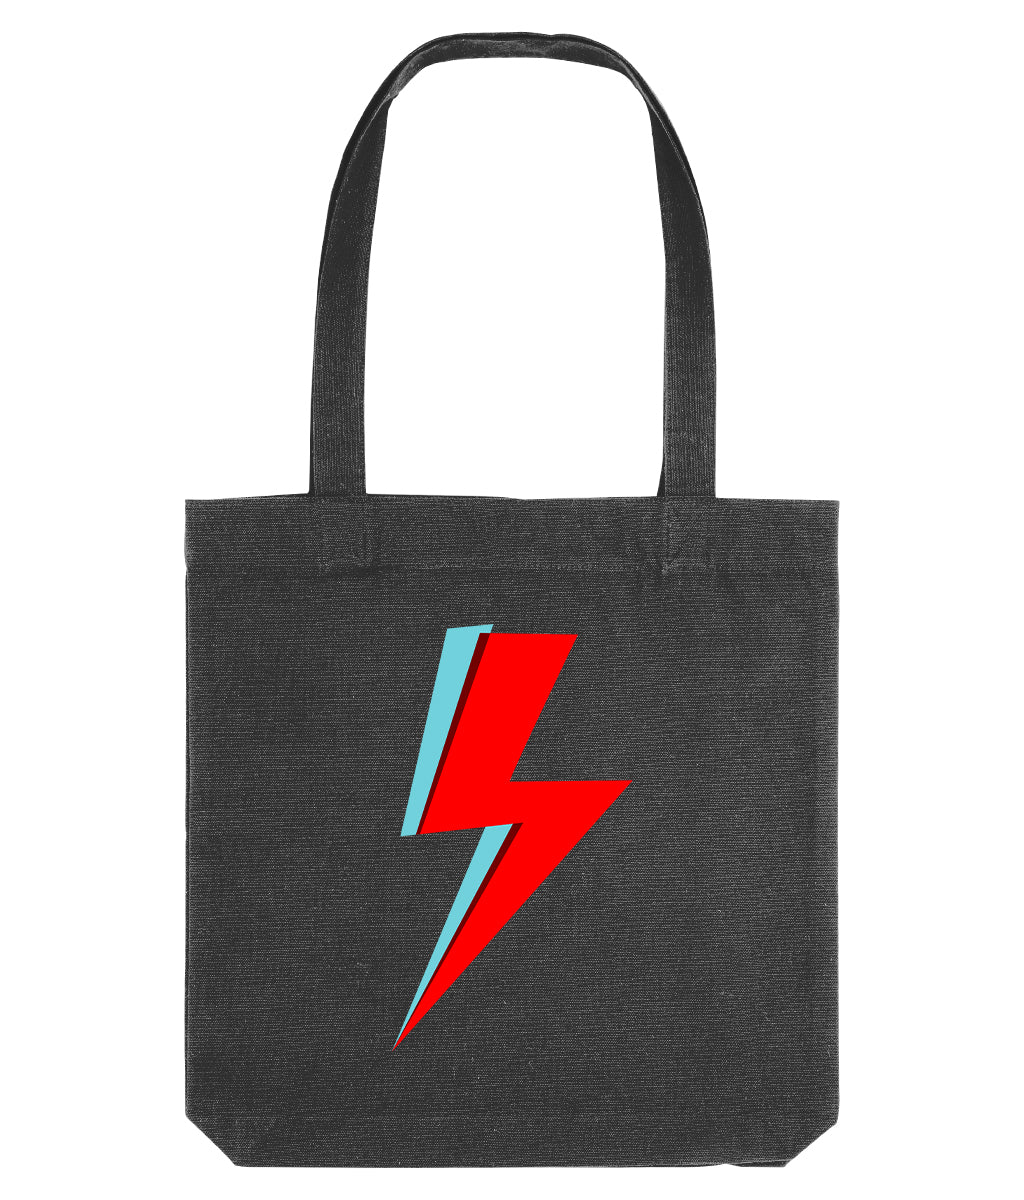 Bowie Bolt & Vinyl Revolution Double Sided Organic Canvas Tote Bag